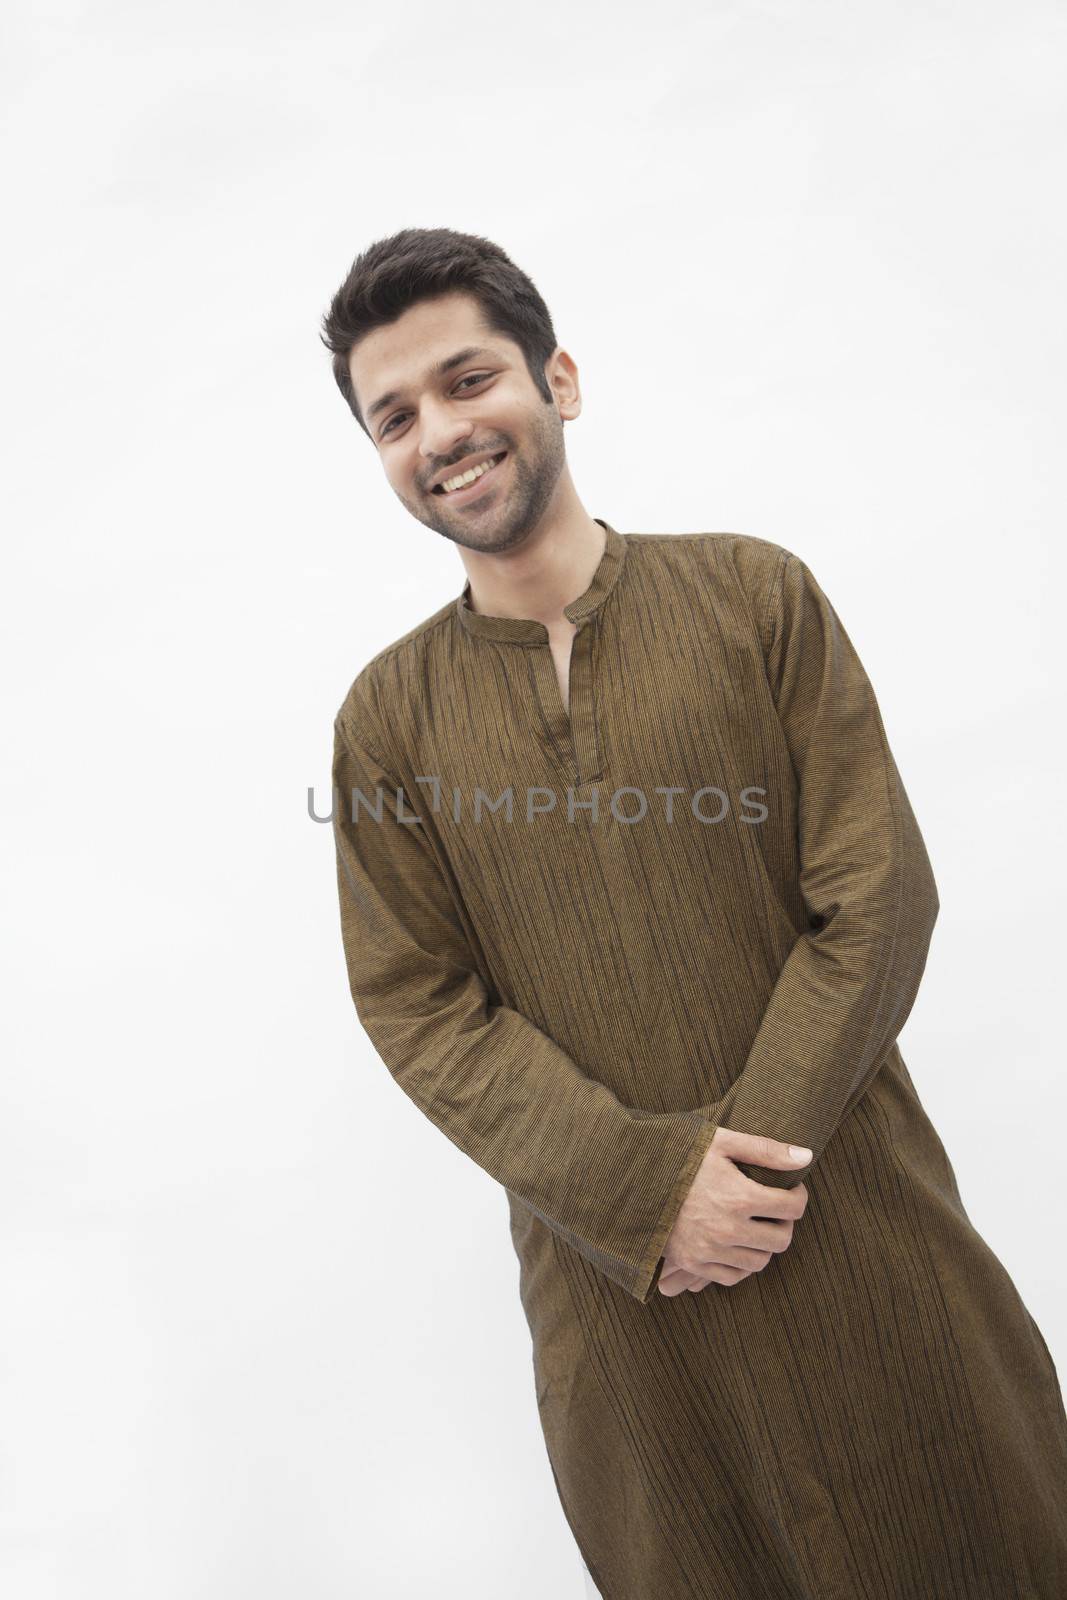 Portrait of smiling young man wearing traditional clothing from Pakistan, studio shot